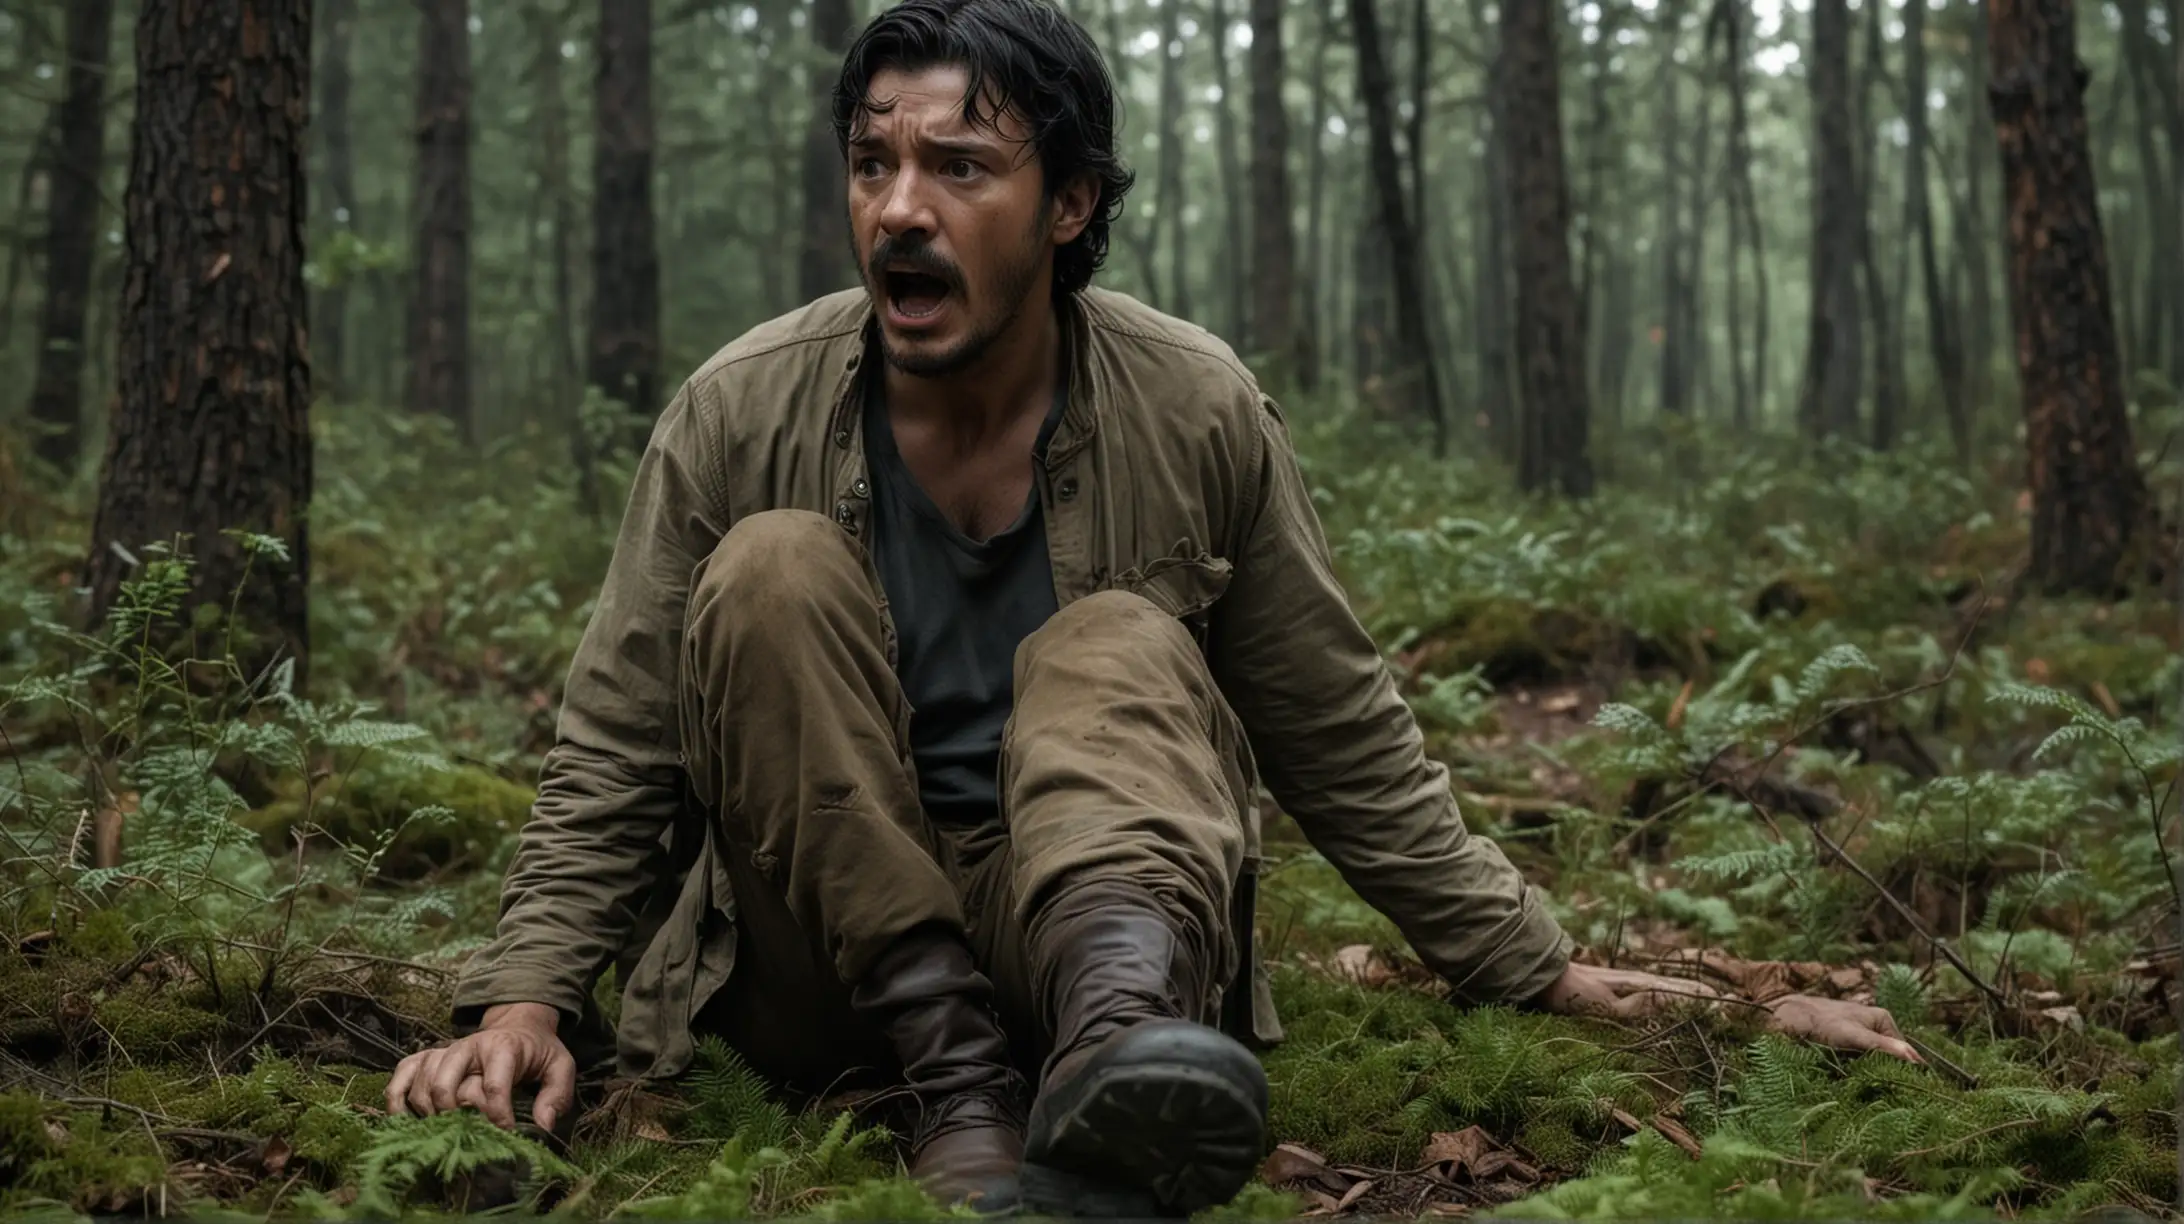 Cassian, a rugged man with black hair and mustache on the forest floor terrified with a deep cut on his leg.